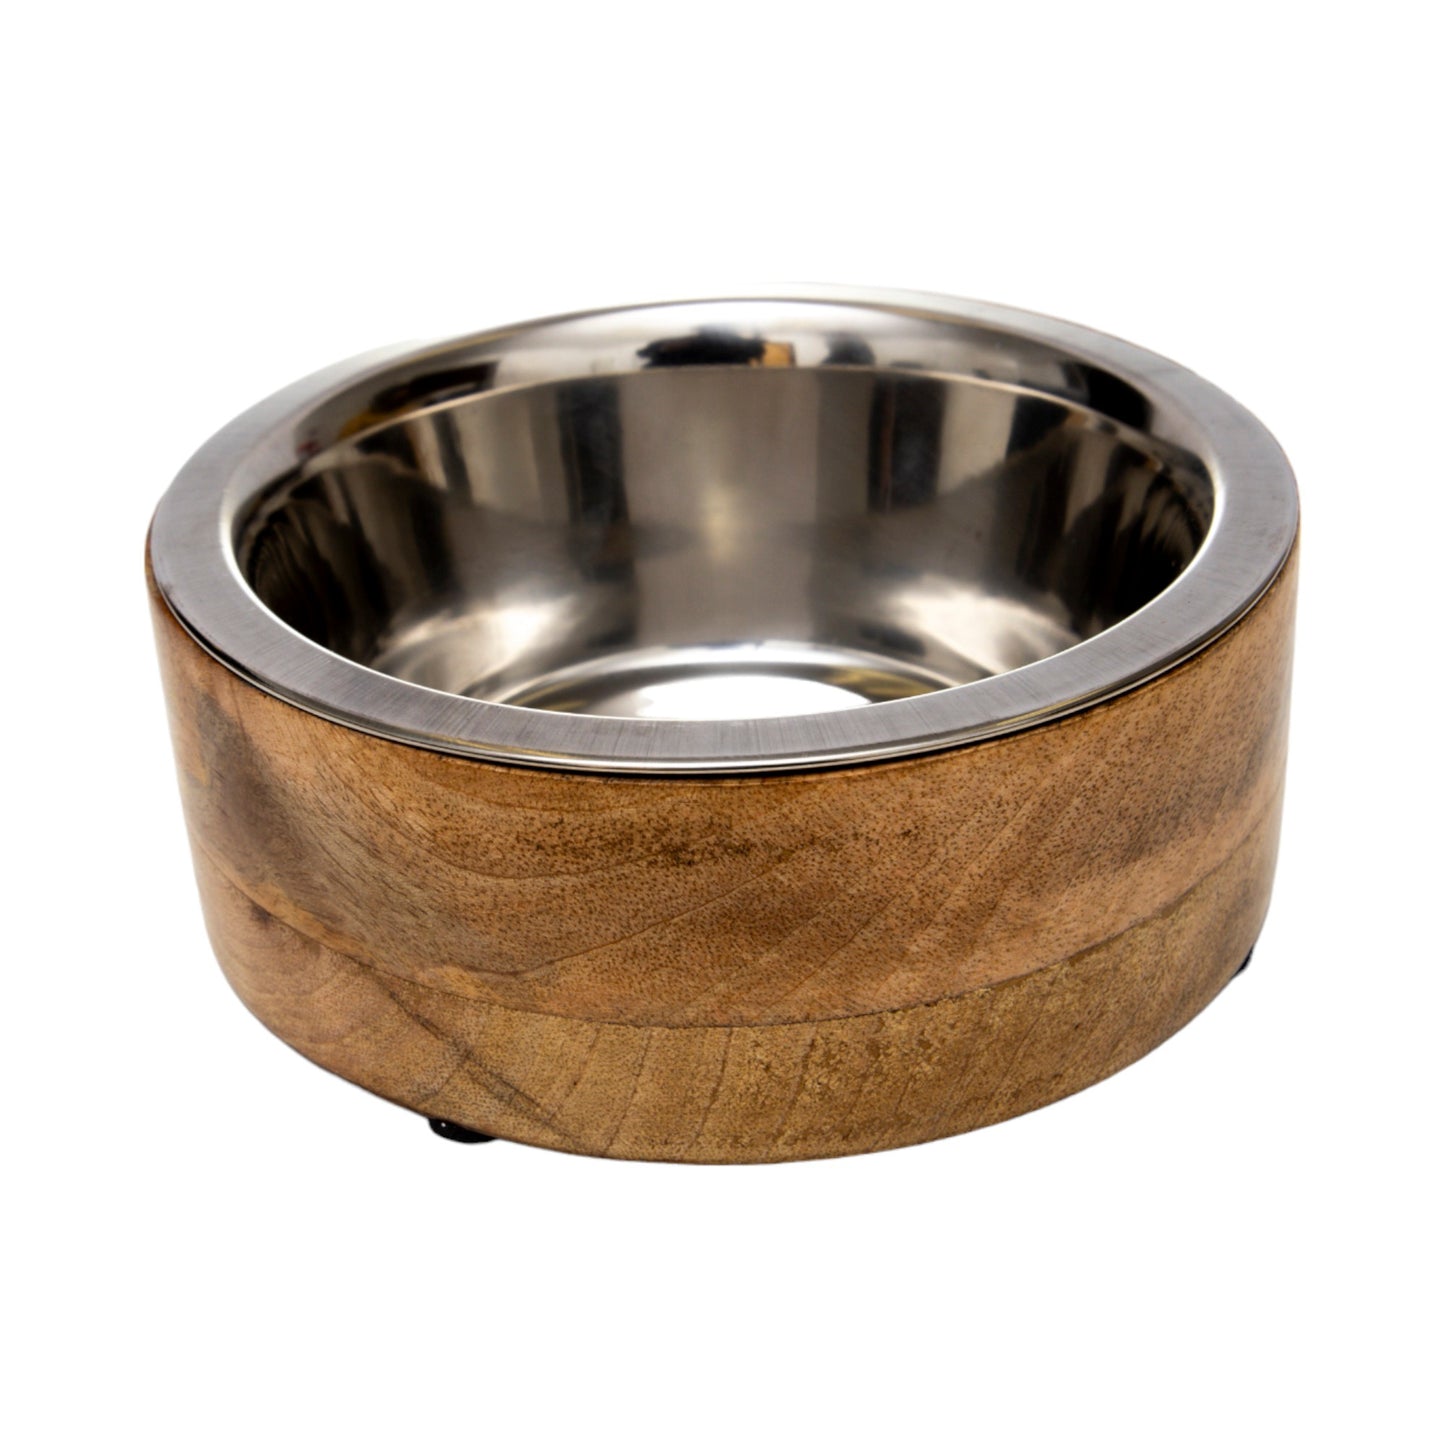 Country Living Stainless Steel Dog Bowl with Cylindrical Mango Wood Holder